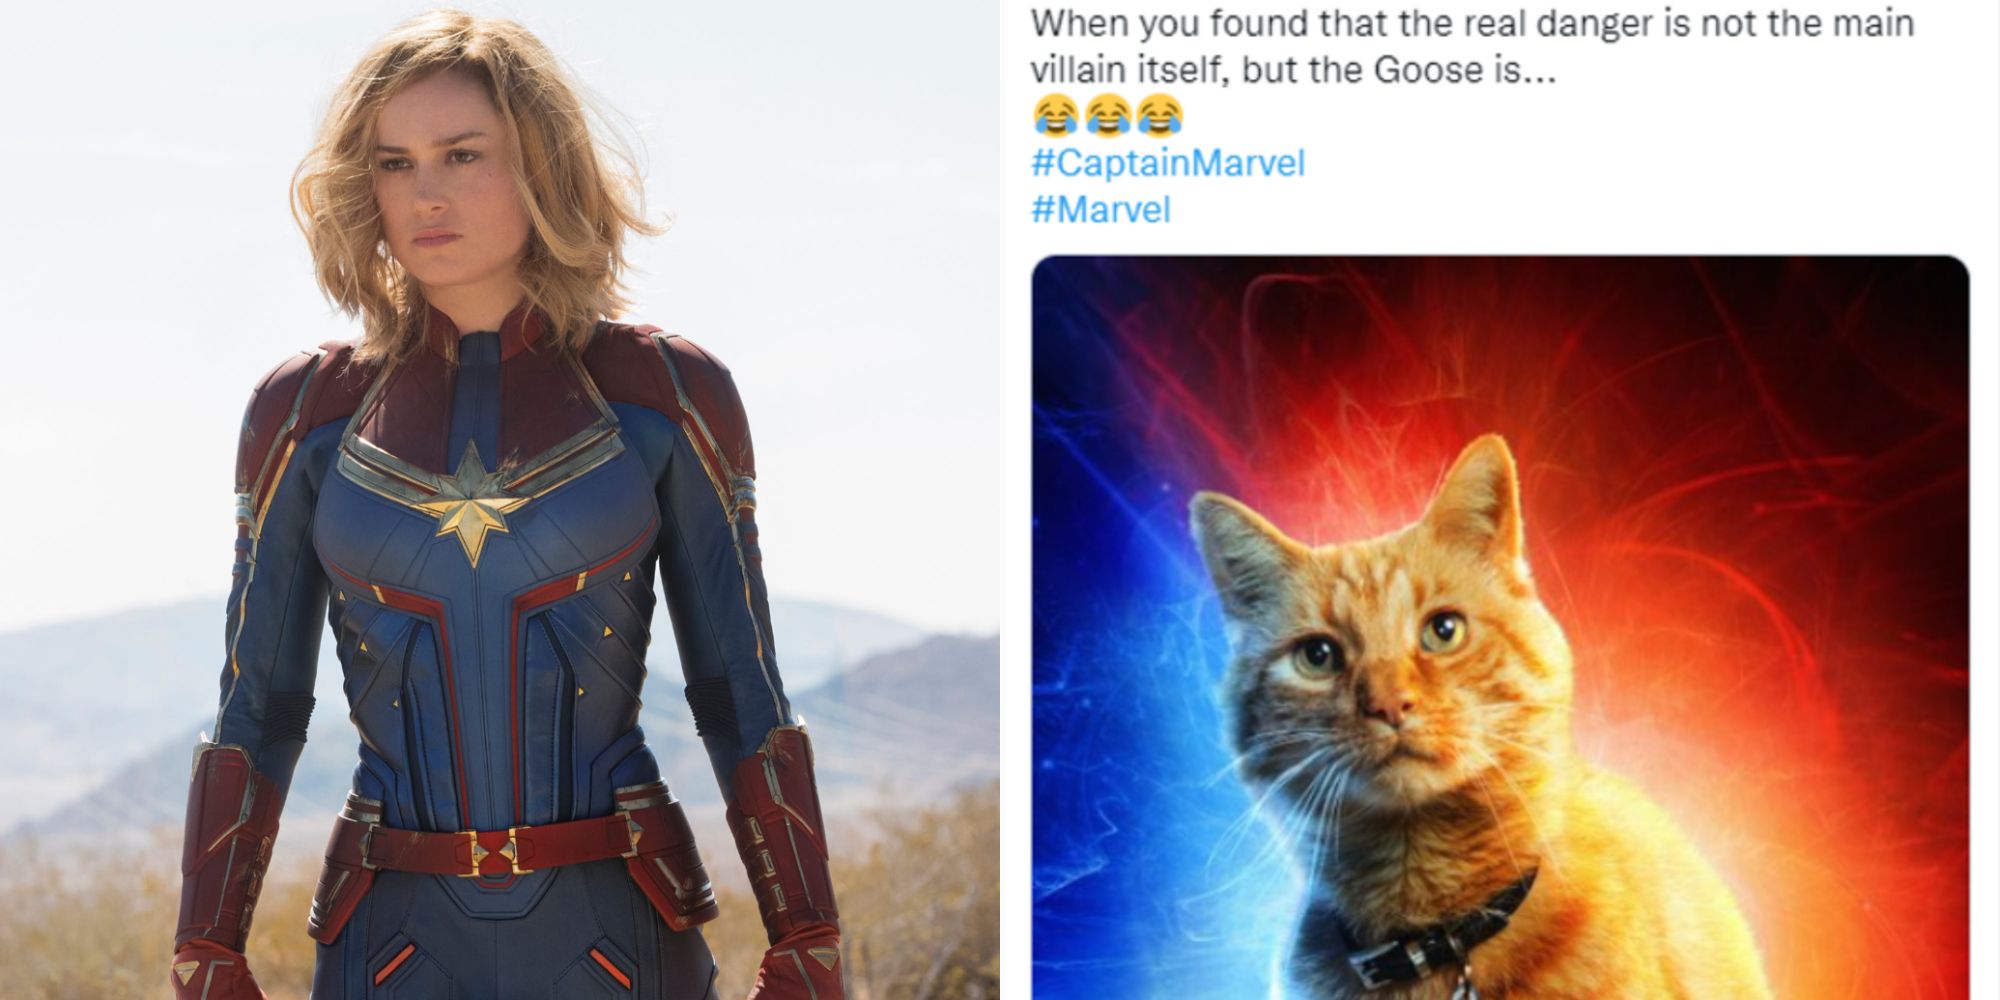 Split image showing Captain Marvel and a meme about Goose the cat.